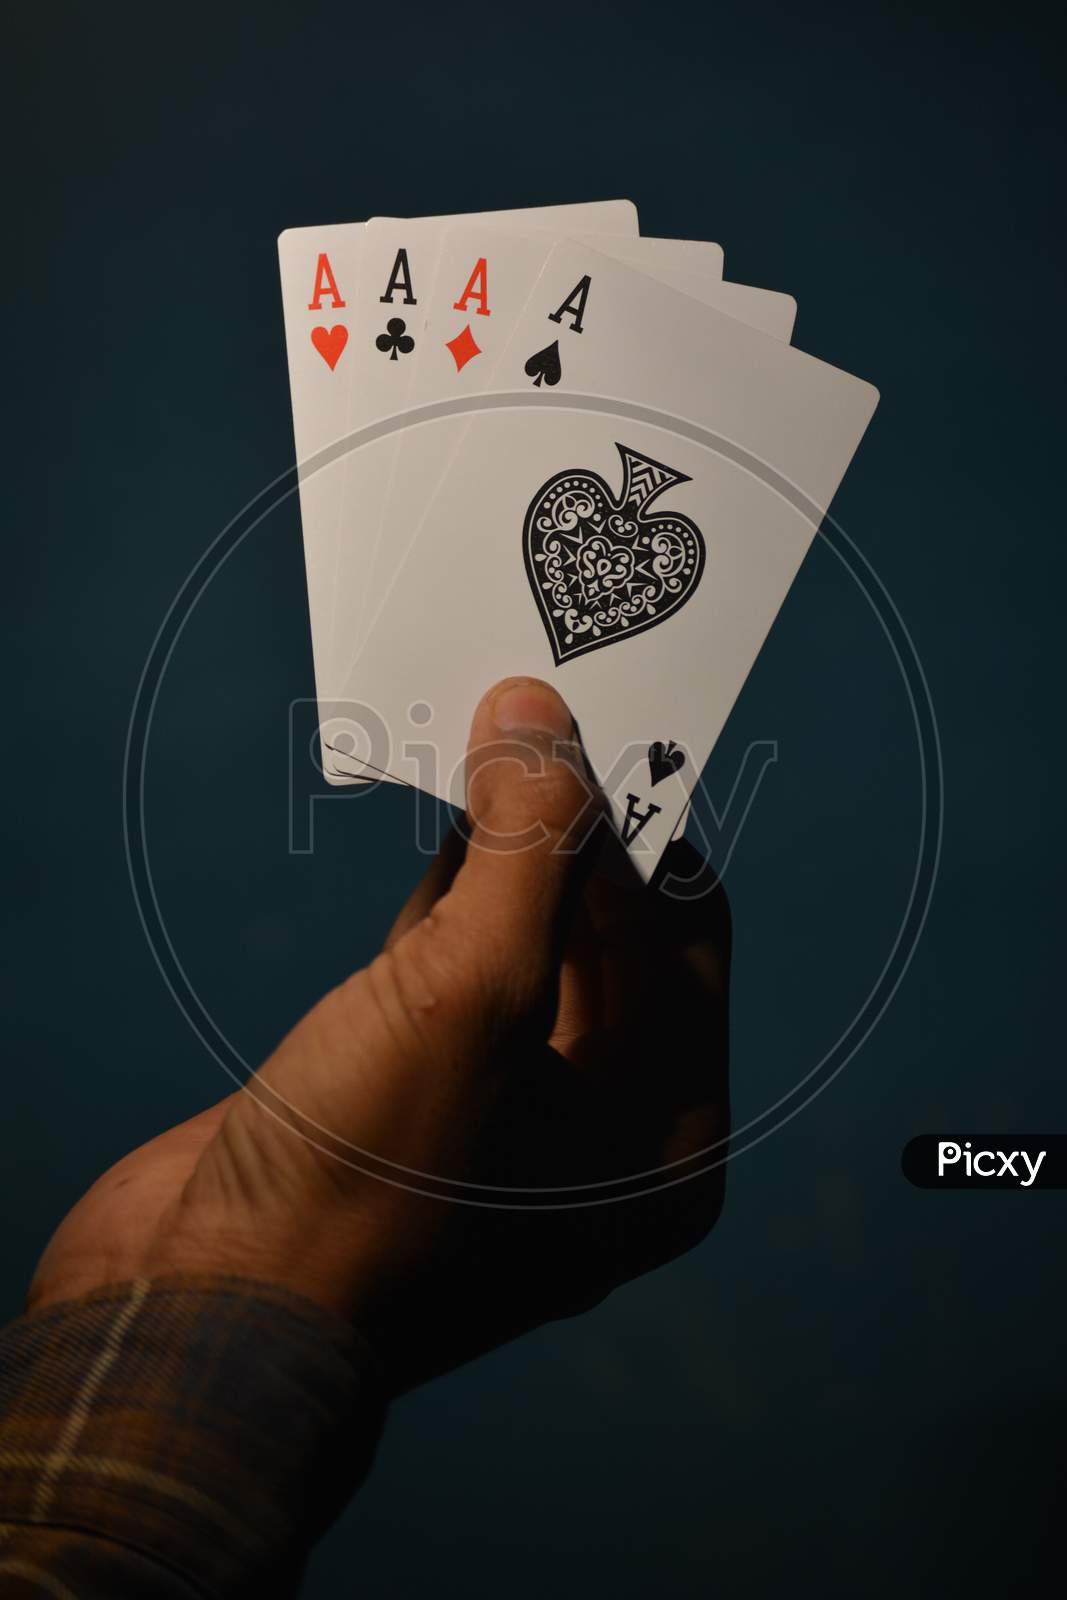 TIKAMGARH, MADHYA PRADESH, INDIA - DECEMBER 15, 2019: Hand holding four aces playing cards, four of kind.